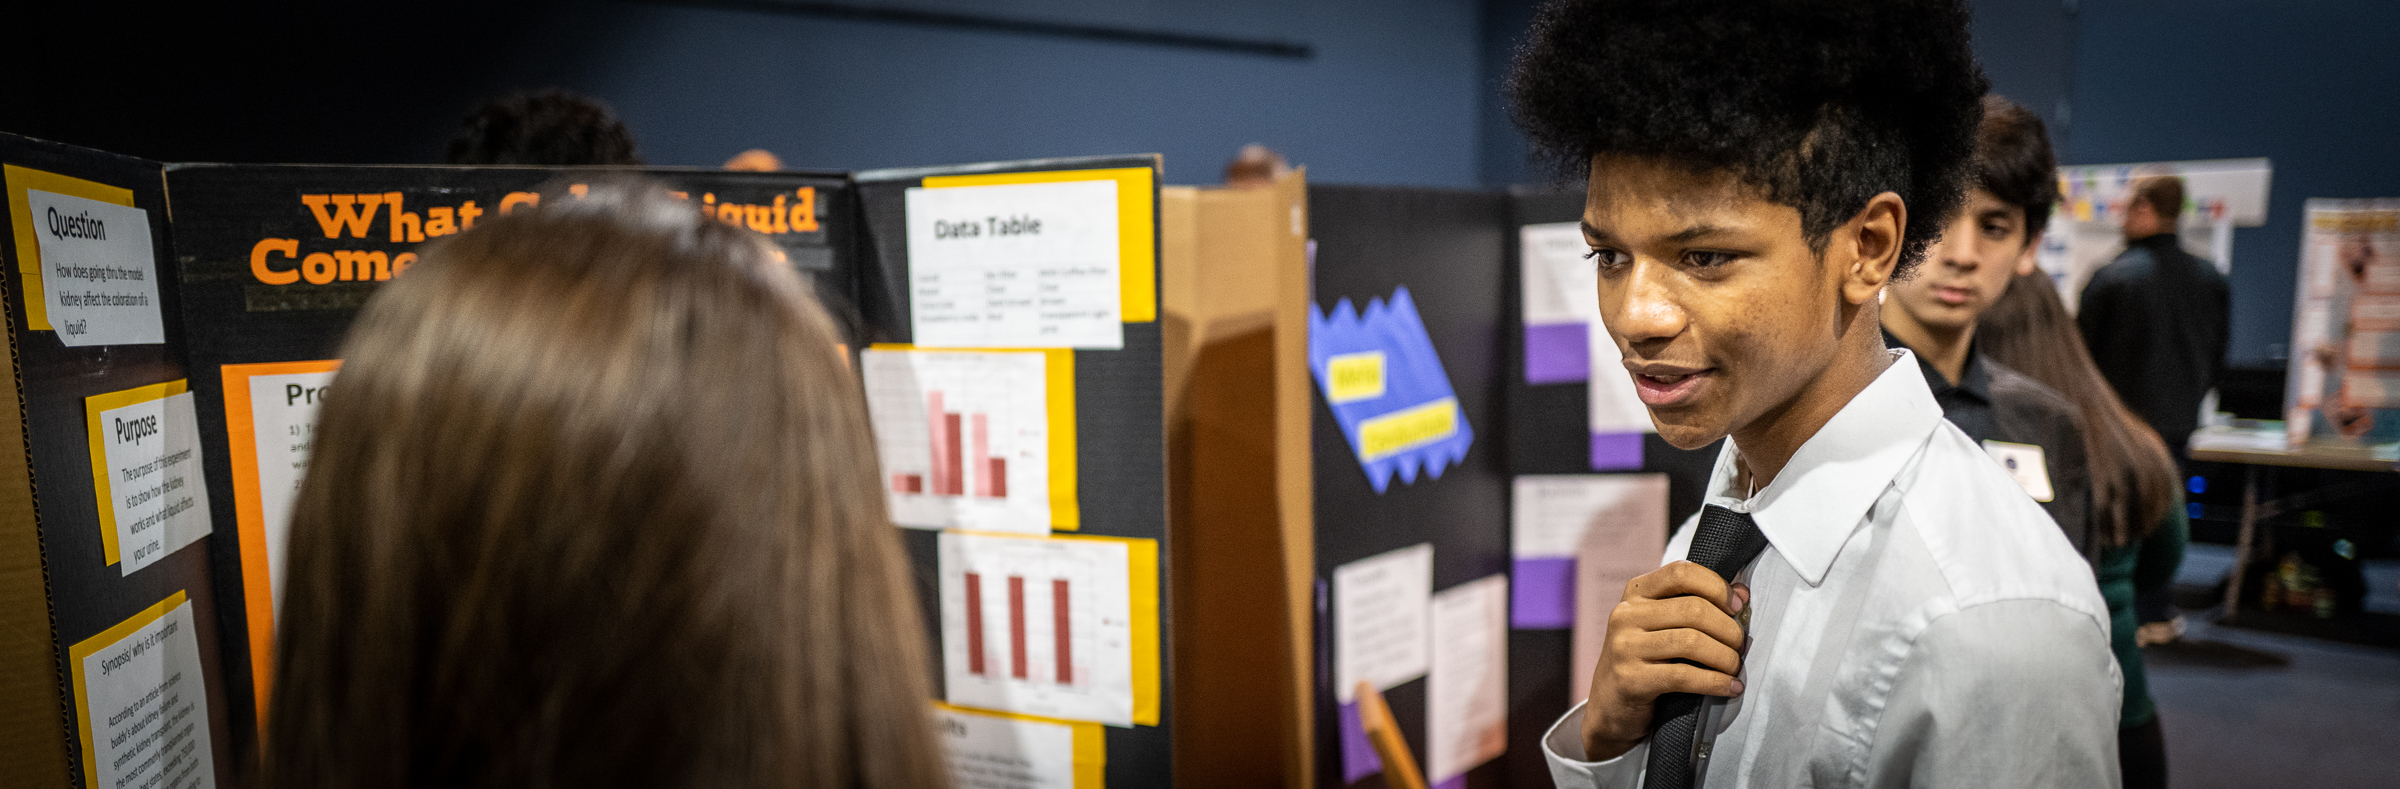 Student-Scientists Honored at 12th Annual DMPS Science Fair